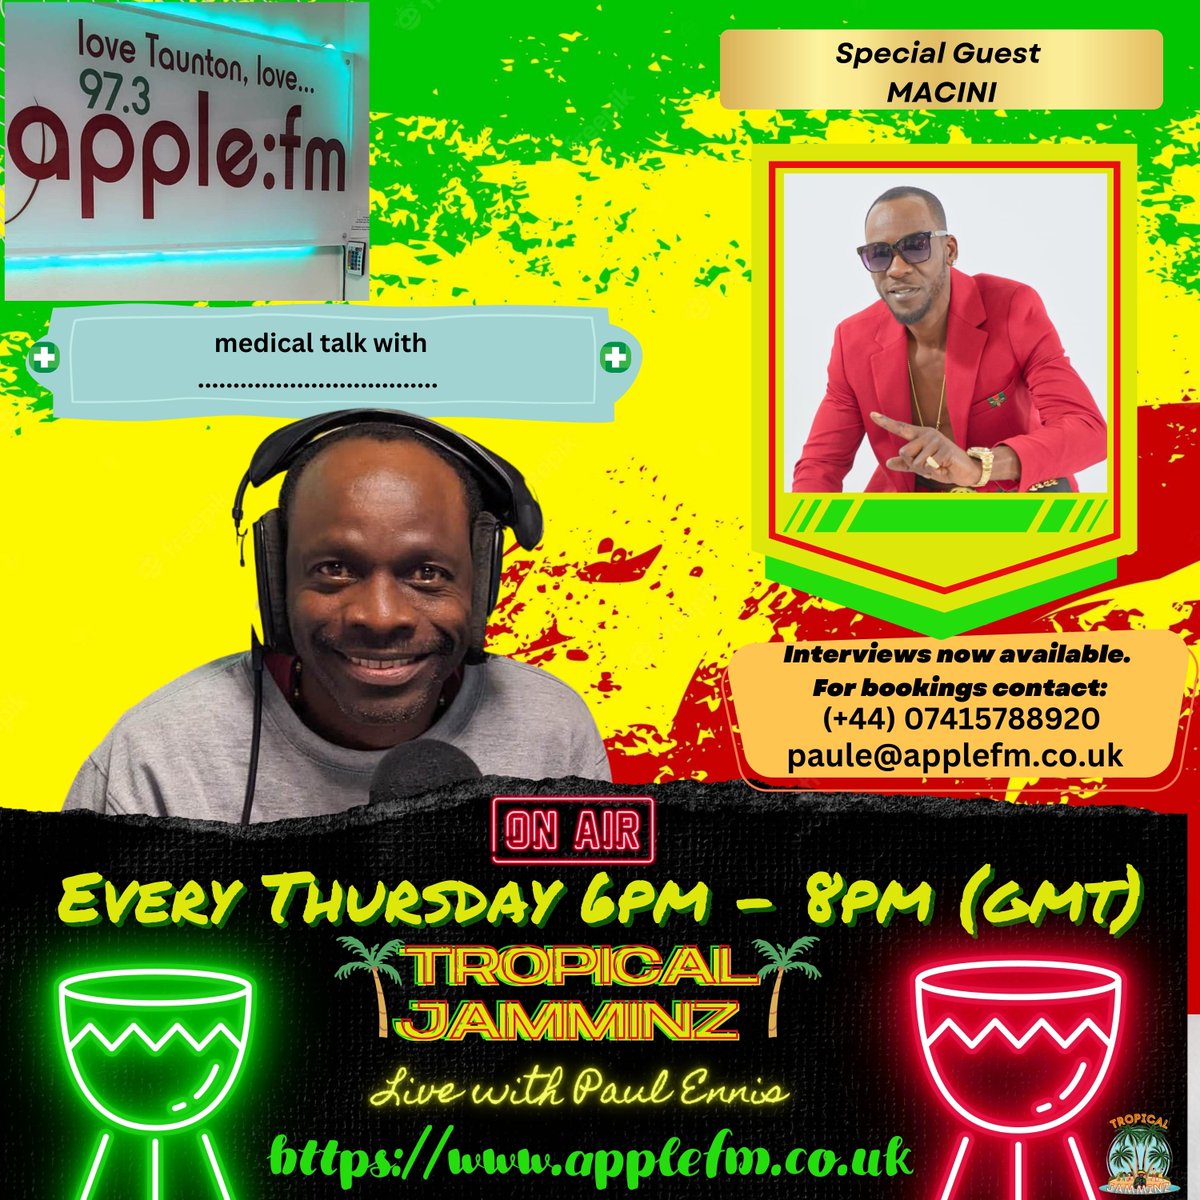 📷 📷 Love Taunton, Love Apple fm' 📷 📷
#macini  LIVE radio interview  on Apple Fm in the UK with Paul Ennis  from 7pm (gmt)
Tune into TROPICAL JAMMINZ from 6pm.
Everyweek on 📷📷📷📷📷
applefm.co.uk
Up coming artists link up for dates.
#mikeydpromo #somersetuk